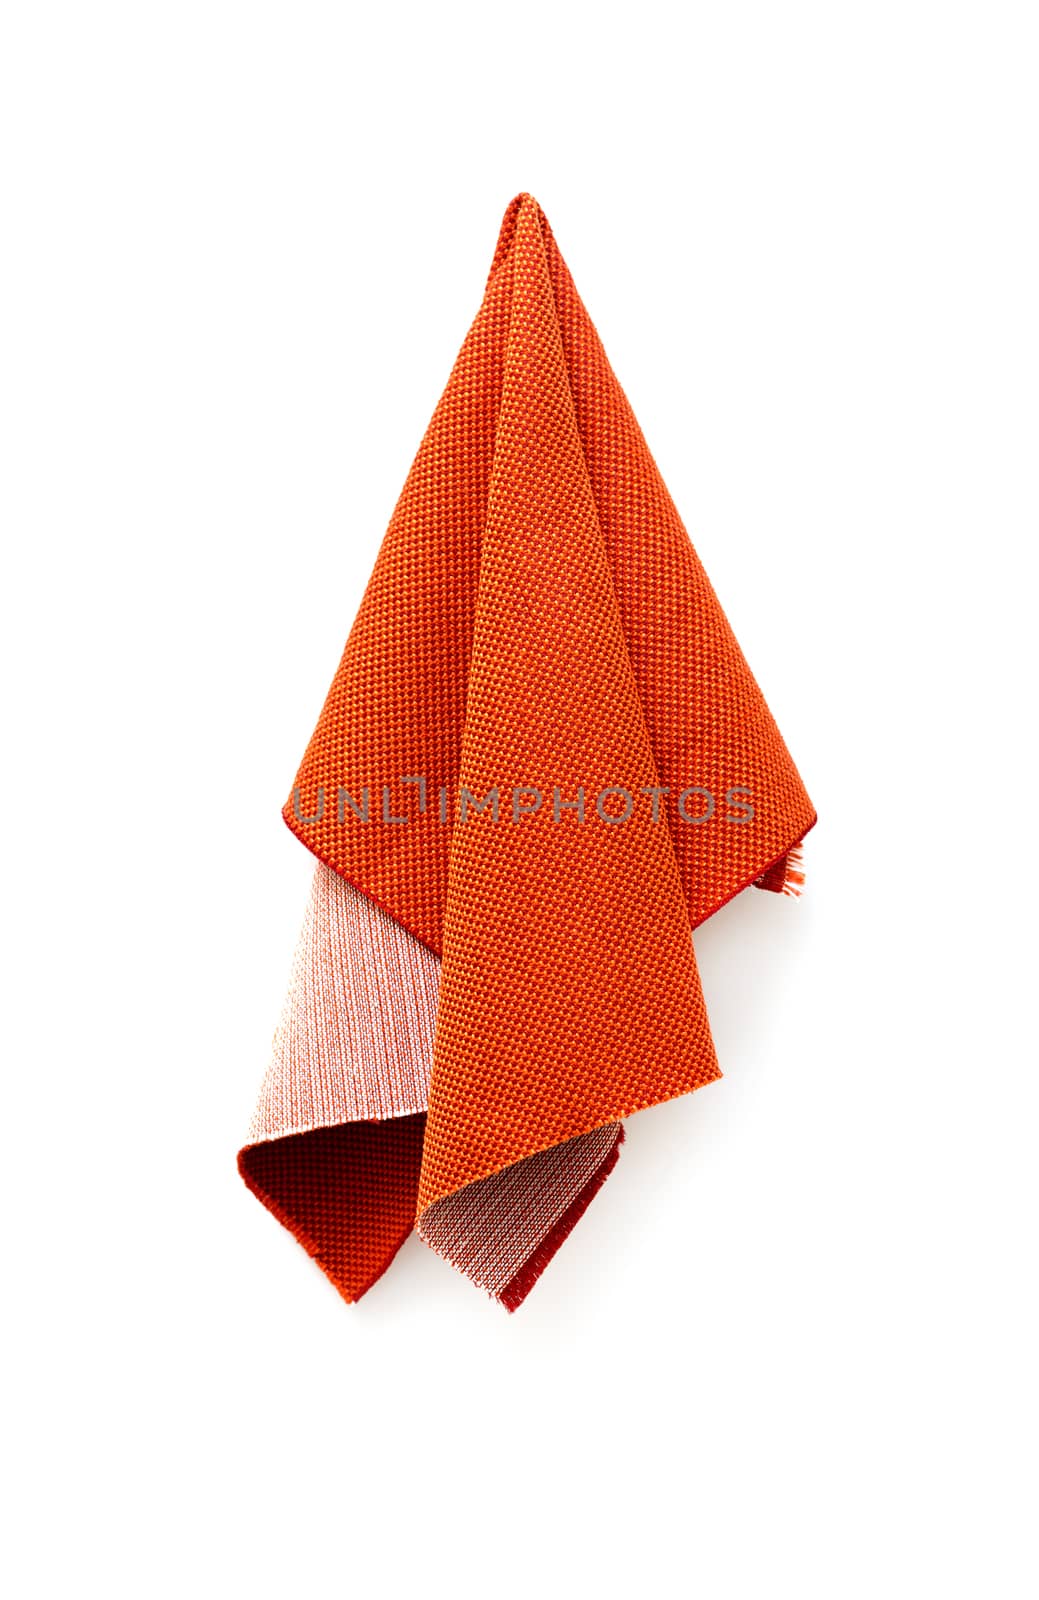 a piece of red cloth on a white background